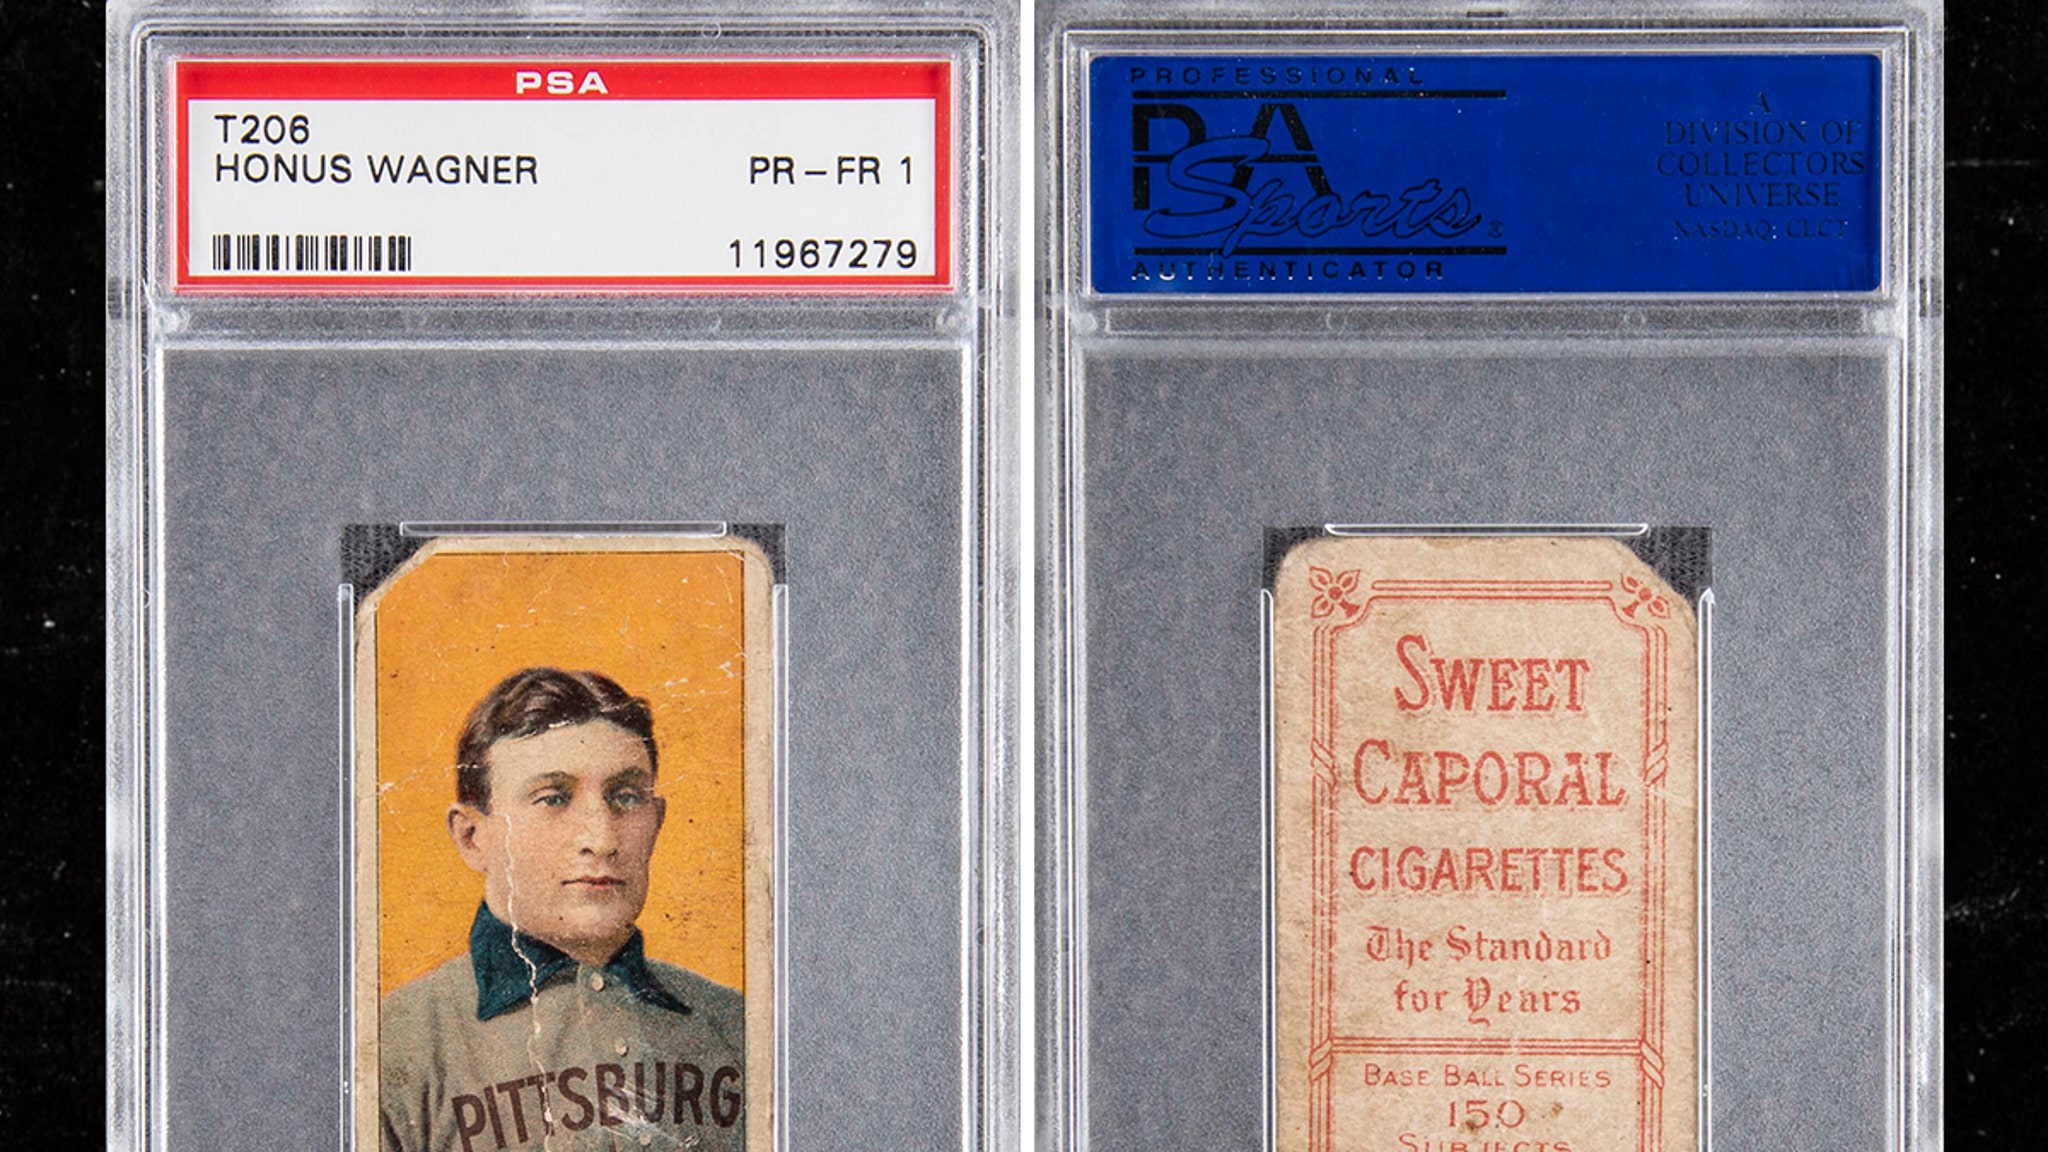 Super Rare Honus Wagner Card Hits Auction Block, Expected To Sell For Over  $1.2 MIL!!